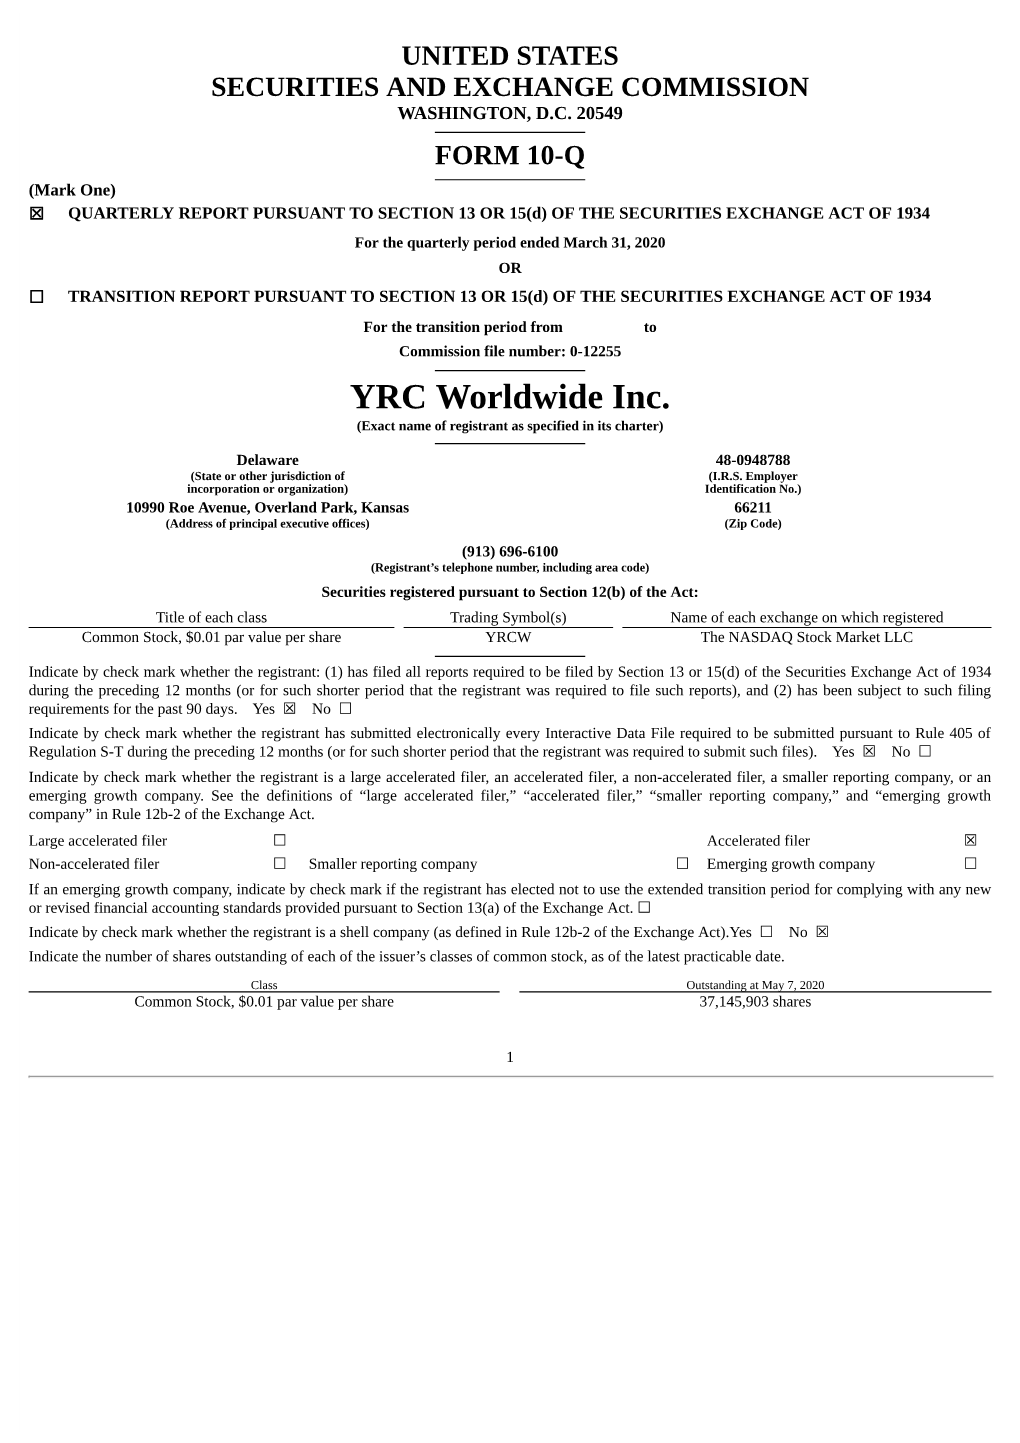 YRC Worldwide Inc. (Exact Name of Registrant As Specified in Its Charter)